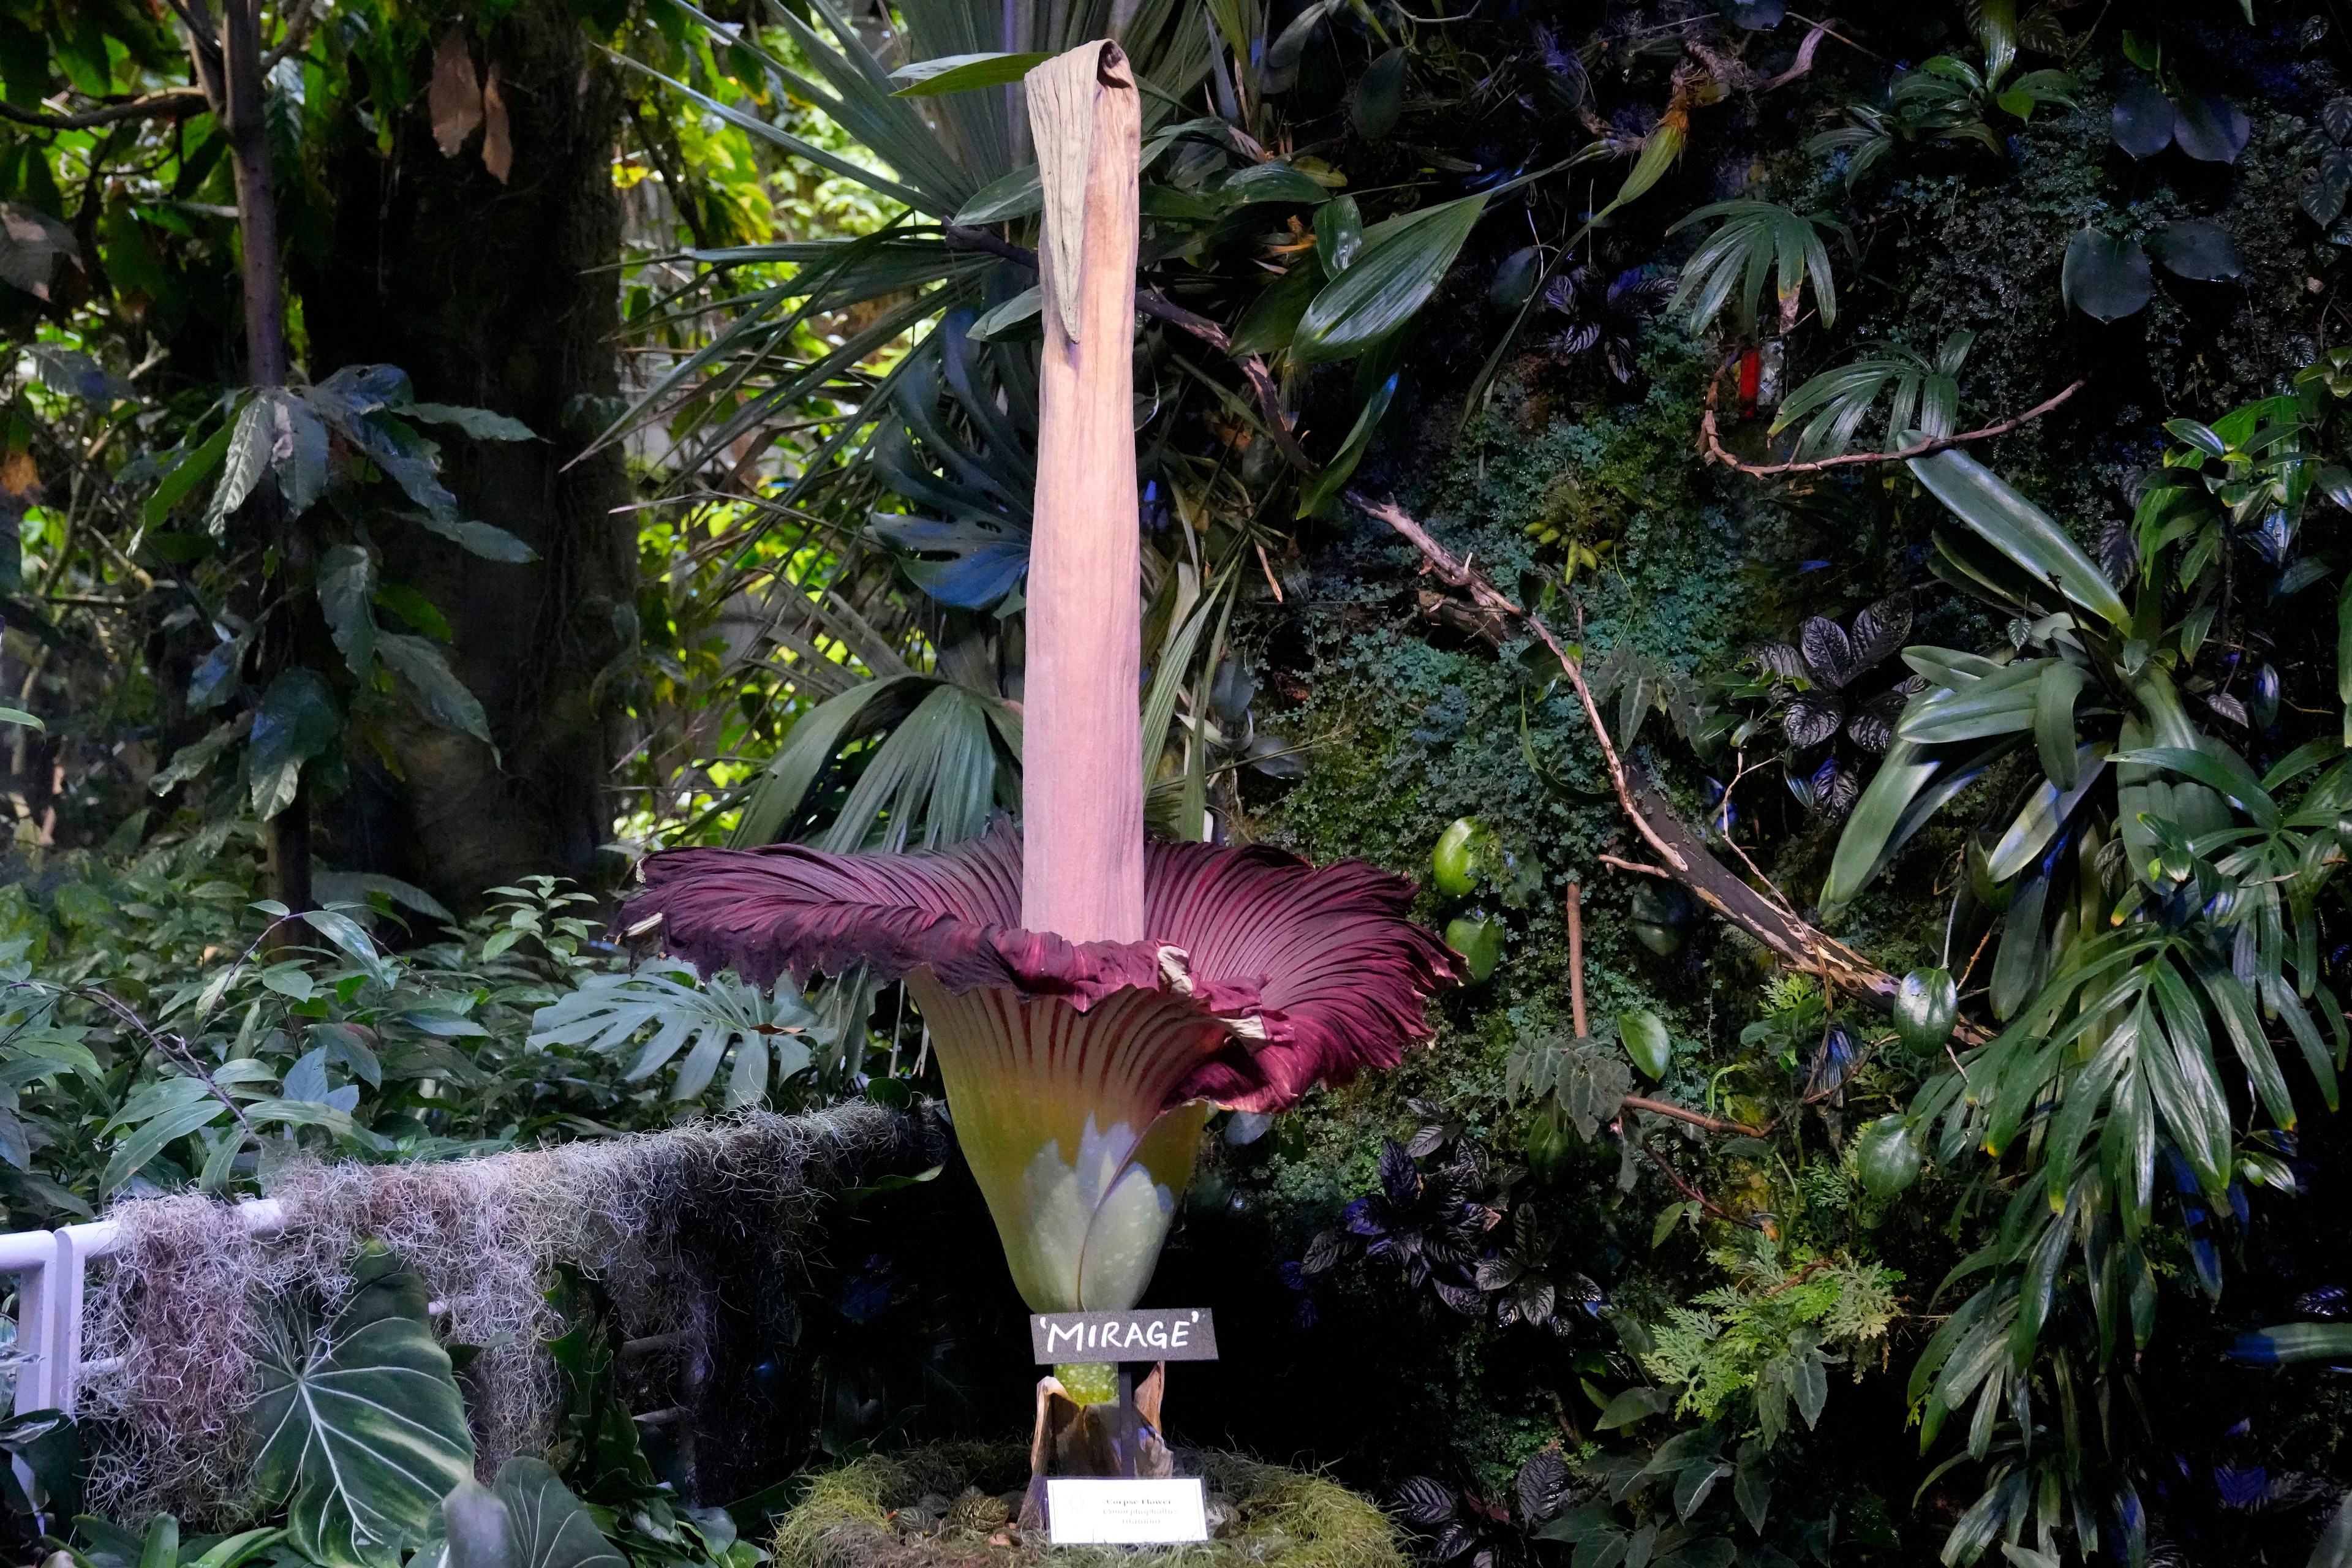 A large purple pink flower in front of green vegetation